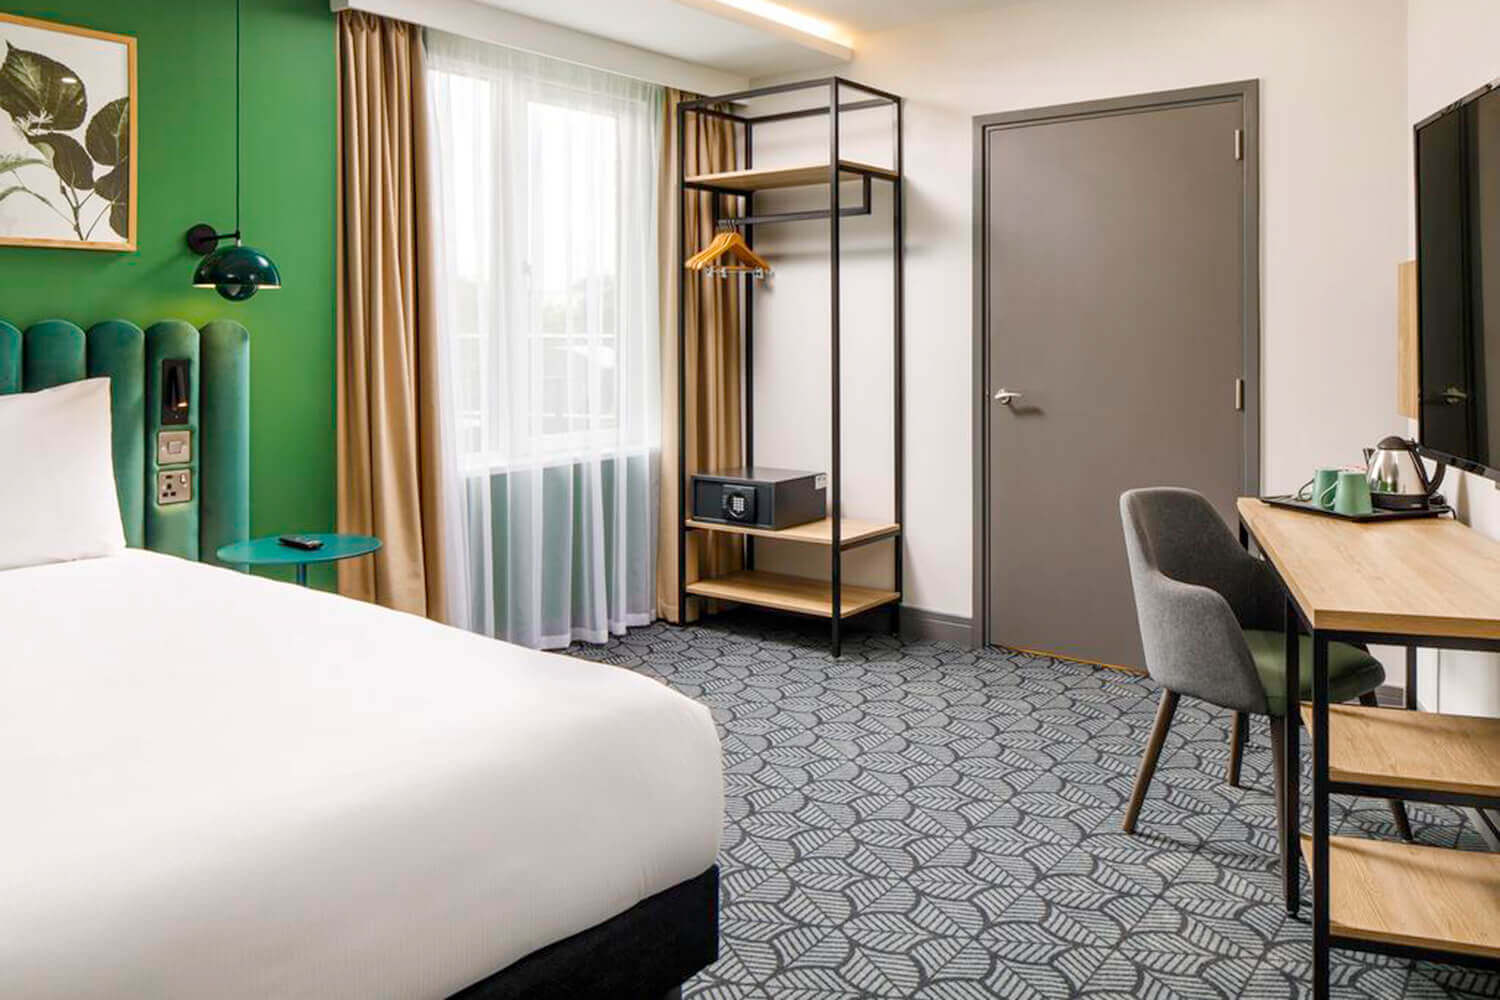 https://tableplacechairs.com/wp-content/uploads/2021/08/IBIS-STYLES-LONDON-for-web-1.jpg